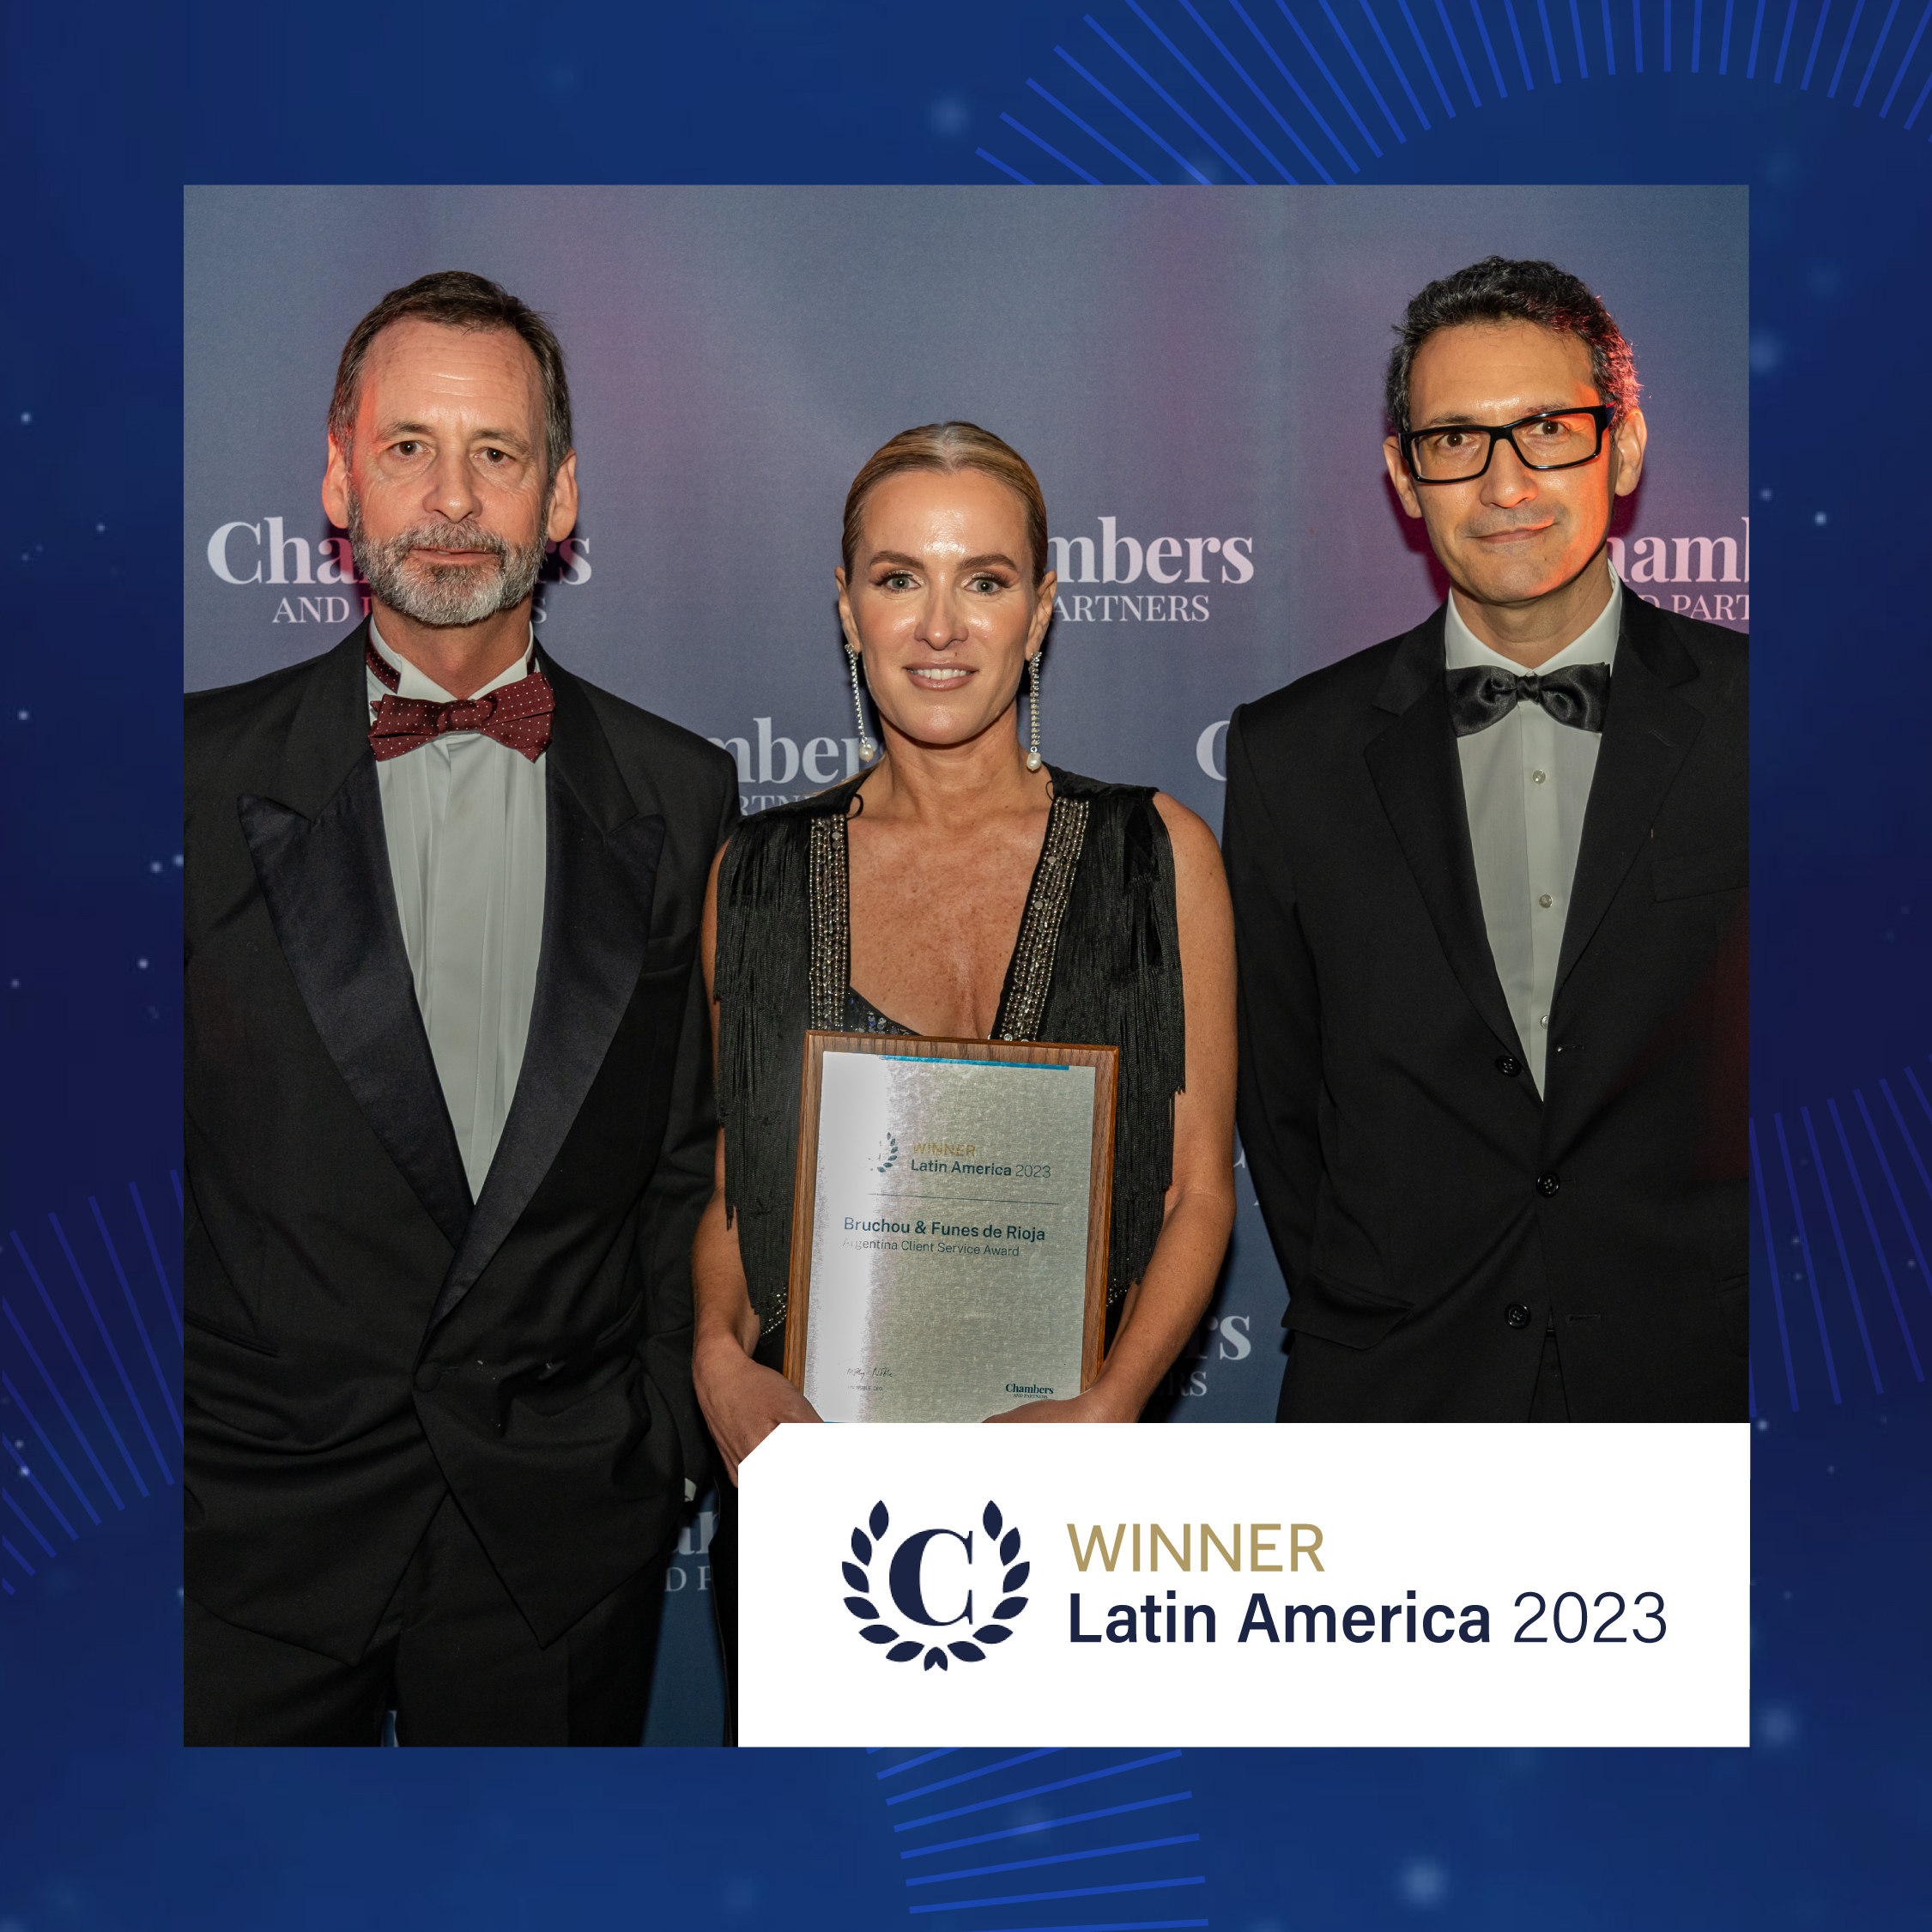 Bruchou & Funes de Rioja recognized with the Client Service Award for Argentina at the Chambers Latin America Awards 2023